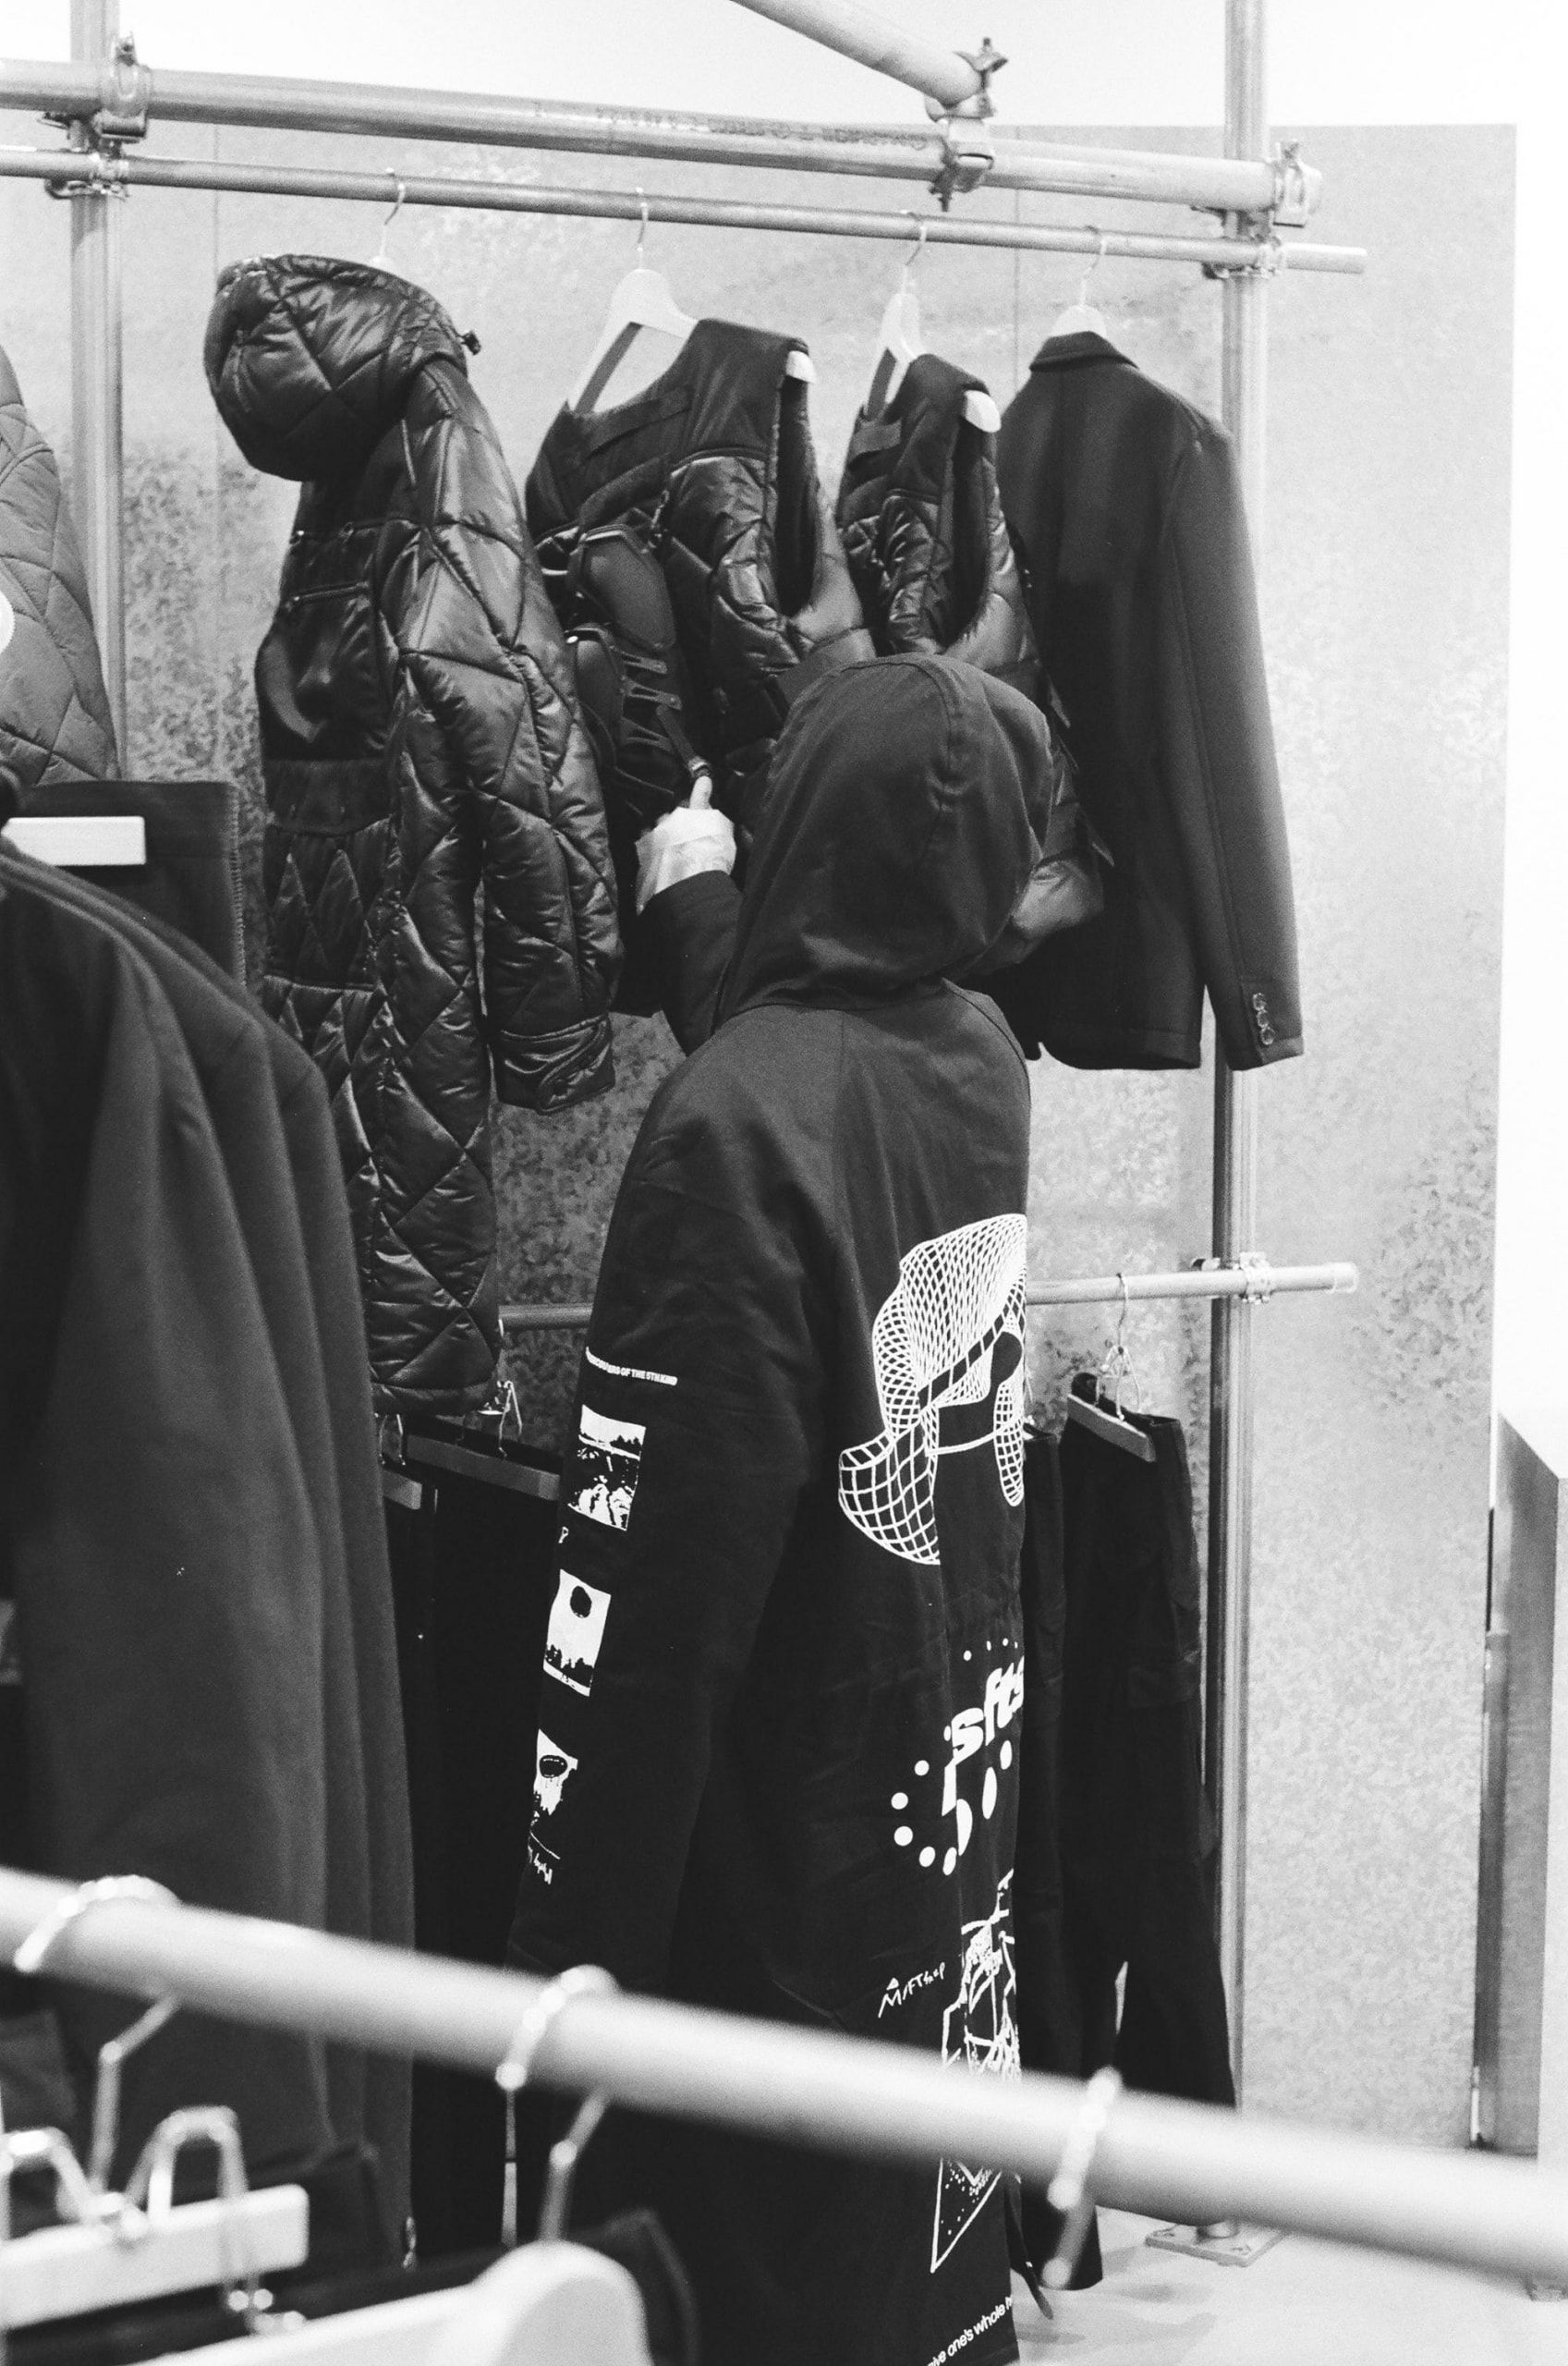 A man looking at clothes on a rack - New Balance